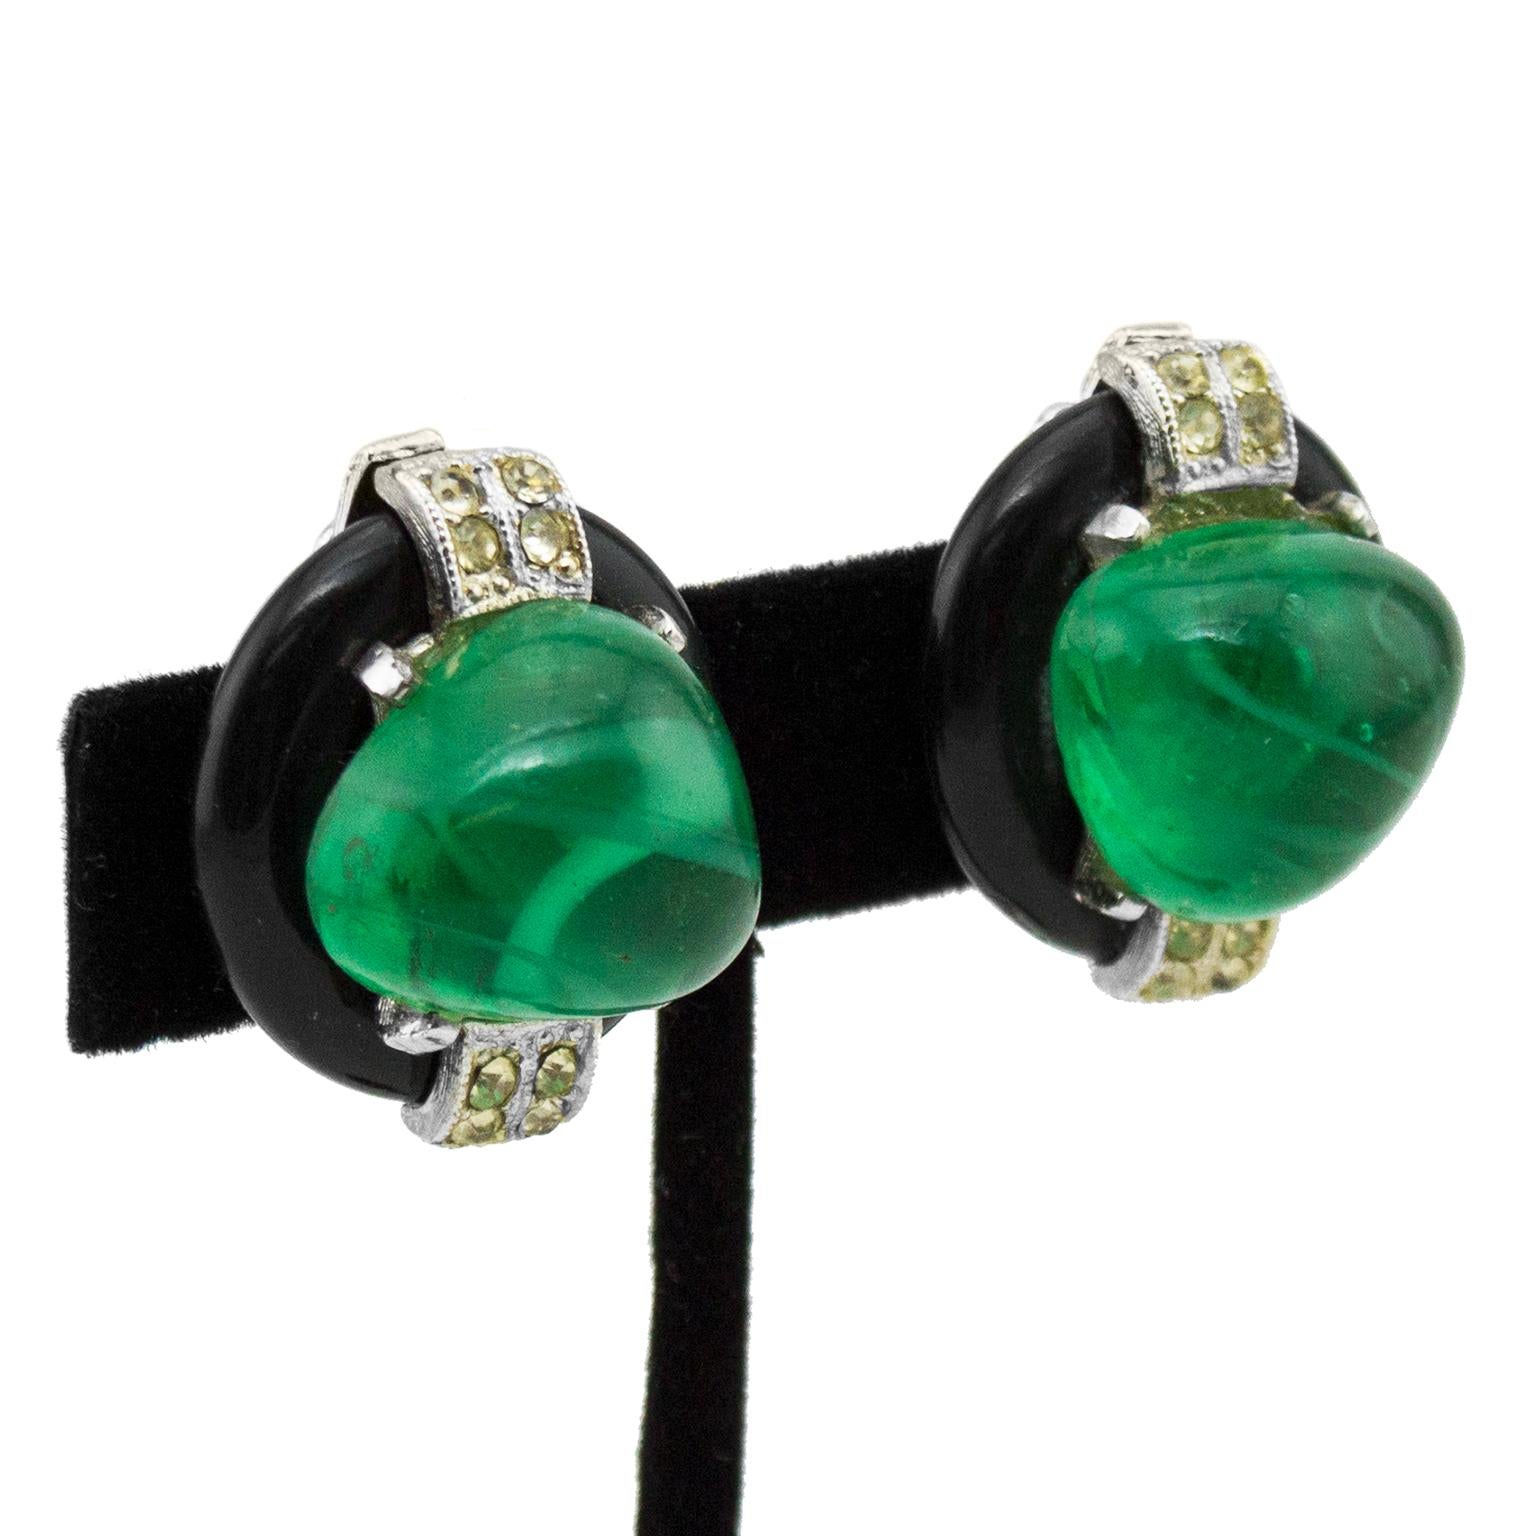 Fabulous 1980s oval KJL faux emerald cabochon clip on style earrings. The irregularly shaped cabochons are surrounded by faux onyx and set in silver with rhinestone bands. In excellent condition, signed on the back.